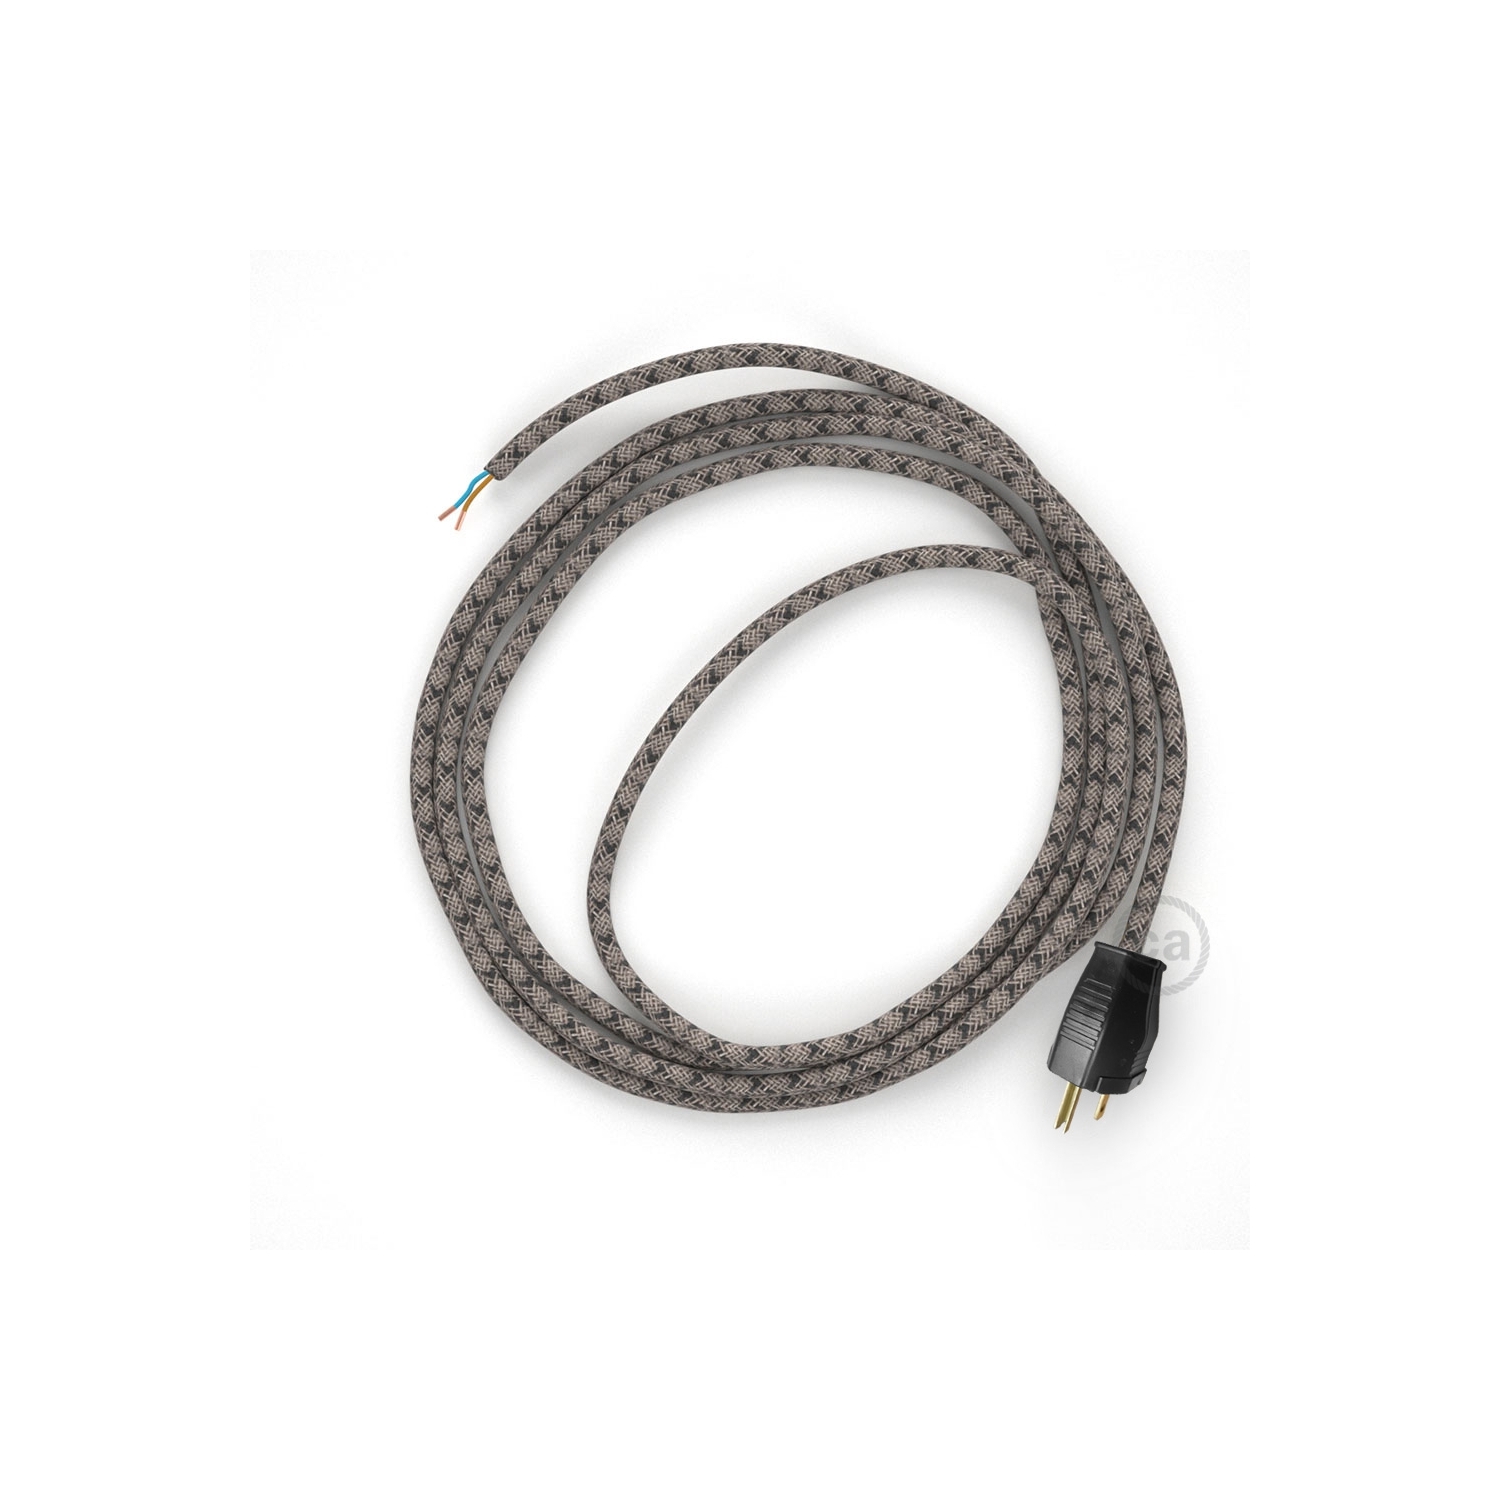 Cord-set - RD64 Natural & Charcoal Linen CrissCross Covered Round Cable